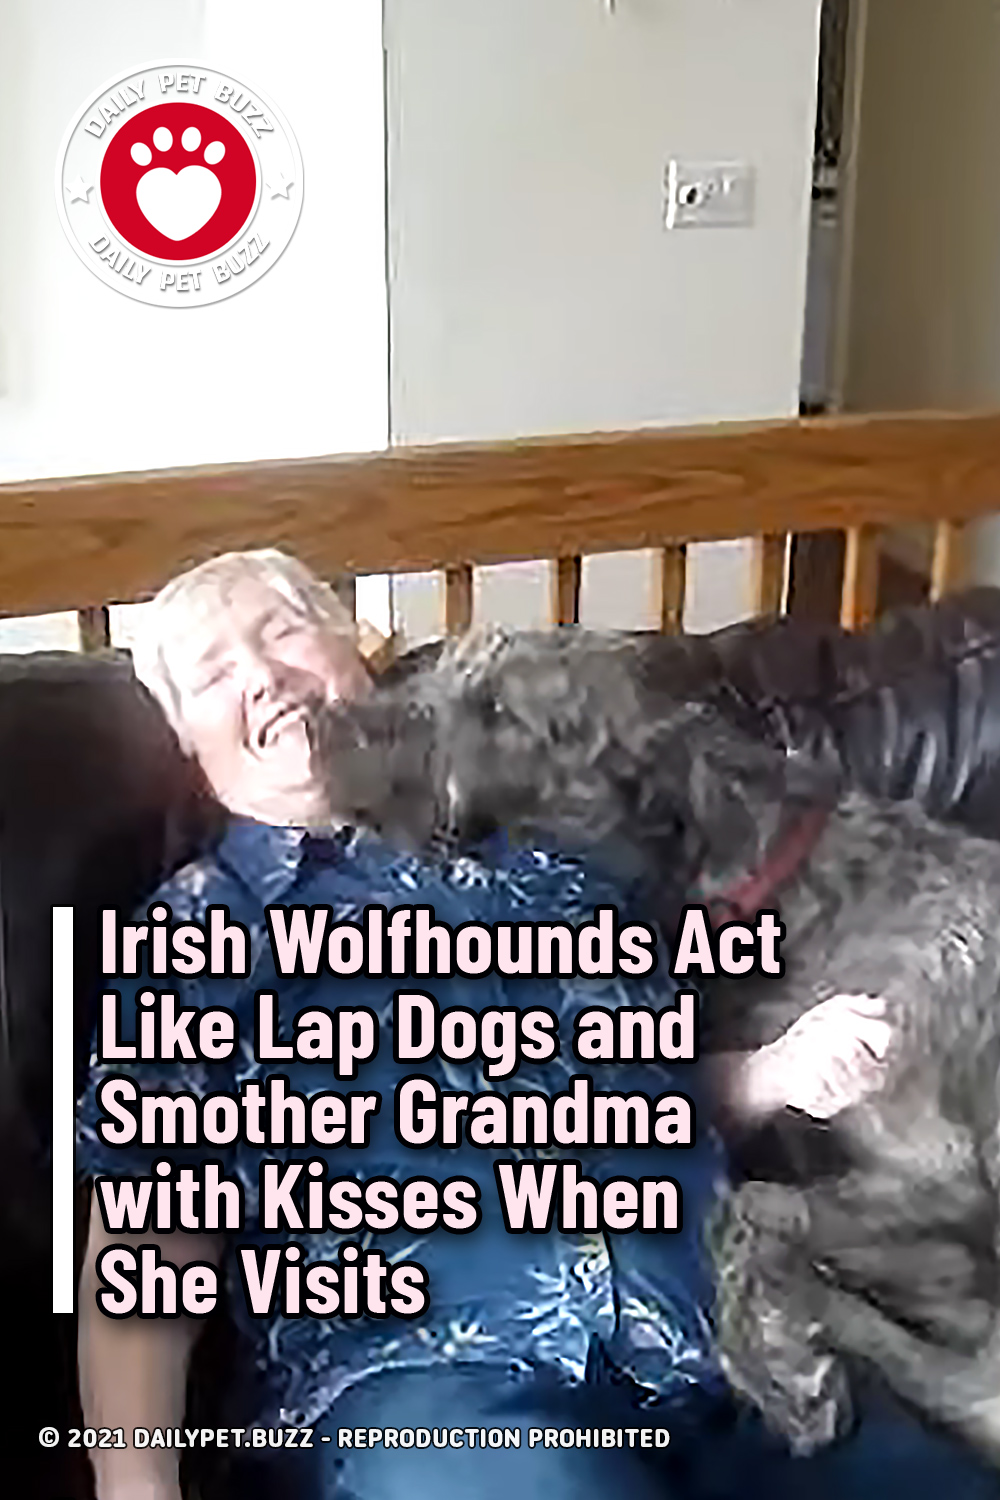 Irish Wolfhounds Act Like Lap Dogs and Smother Grandma with Kisses When She Visits